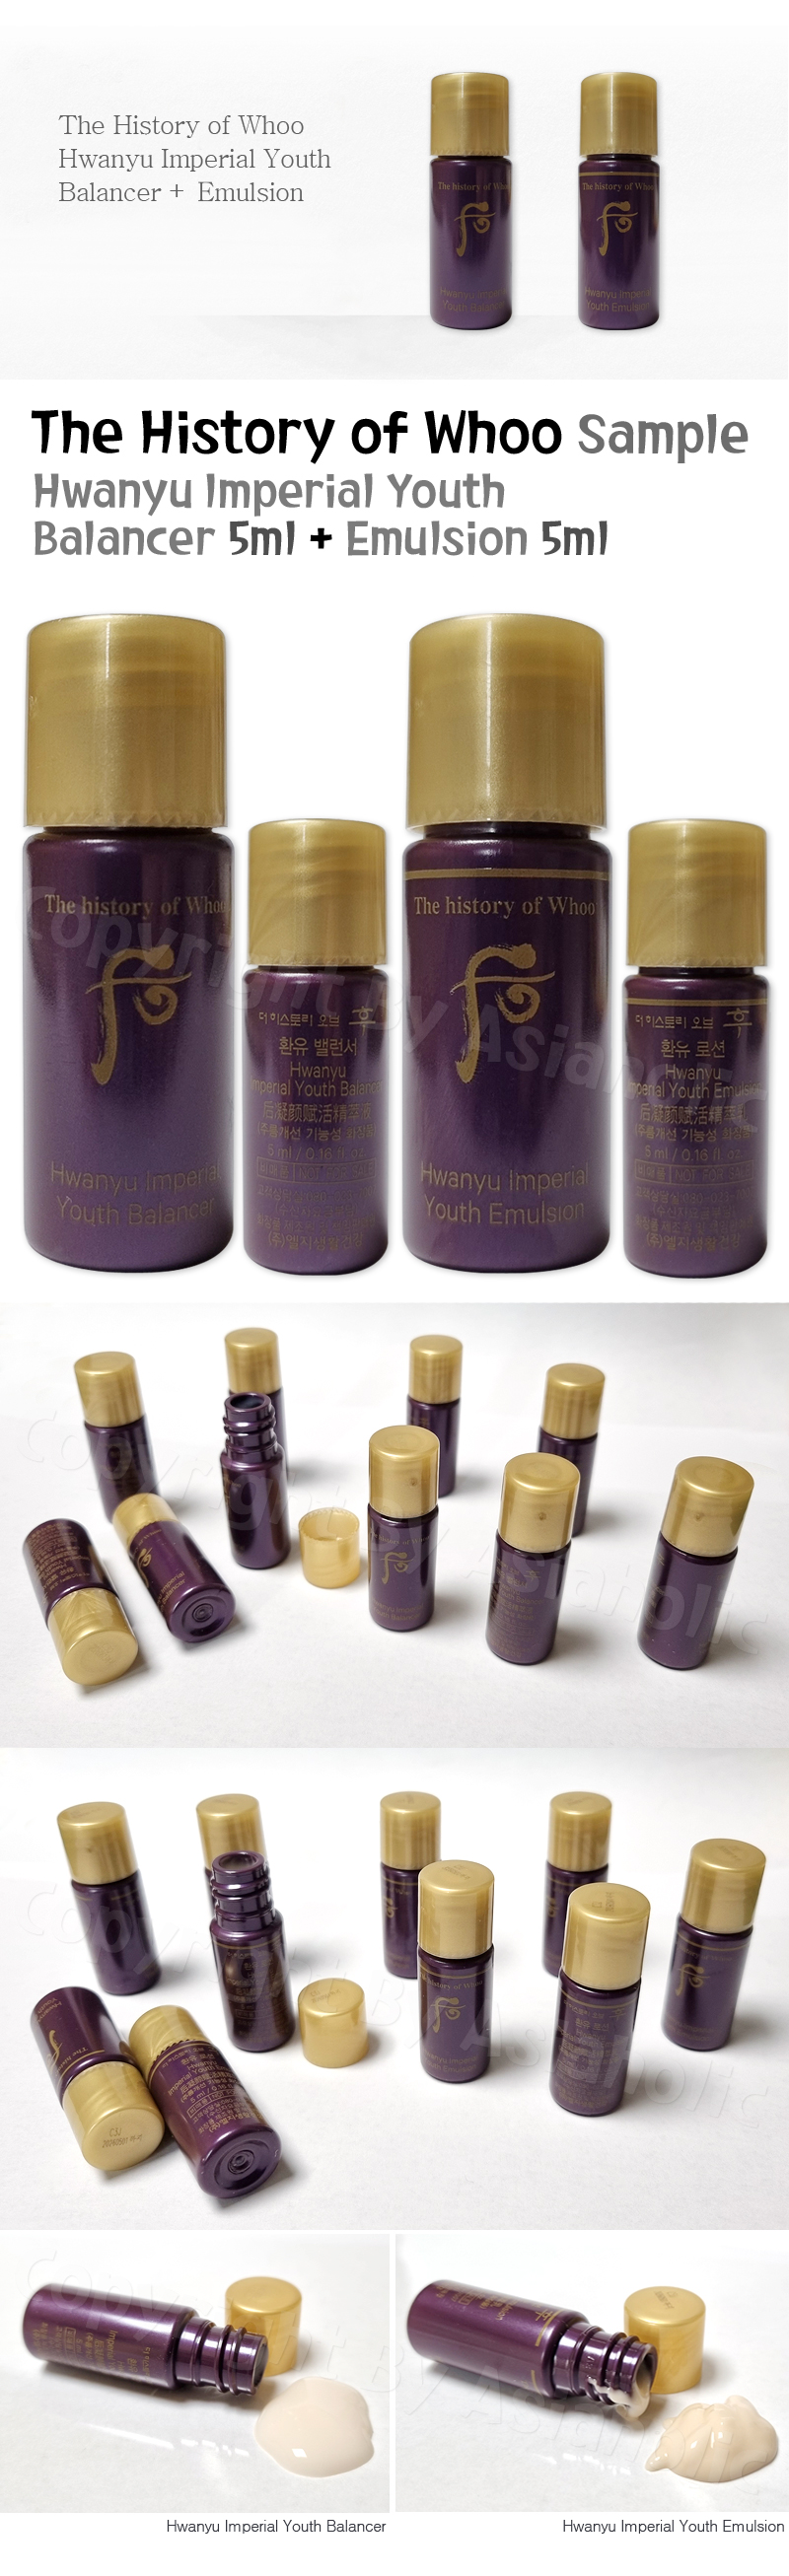 The history of Whoo Hwanyu Imperial Youth Balancer 5ml (14pcs) + Emulsion (14pcs) Premium Sample Newest Version